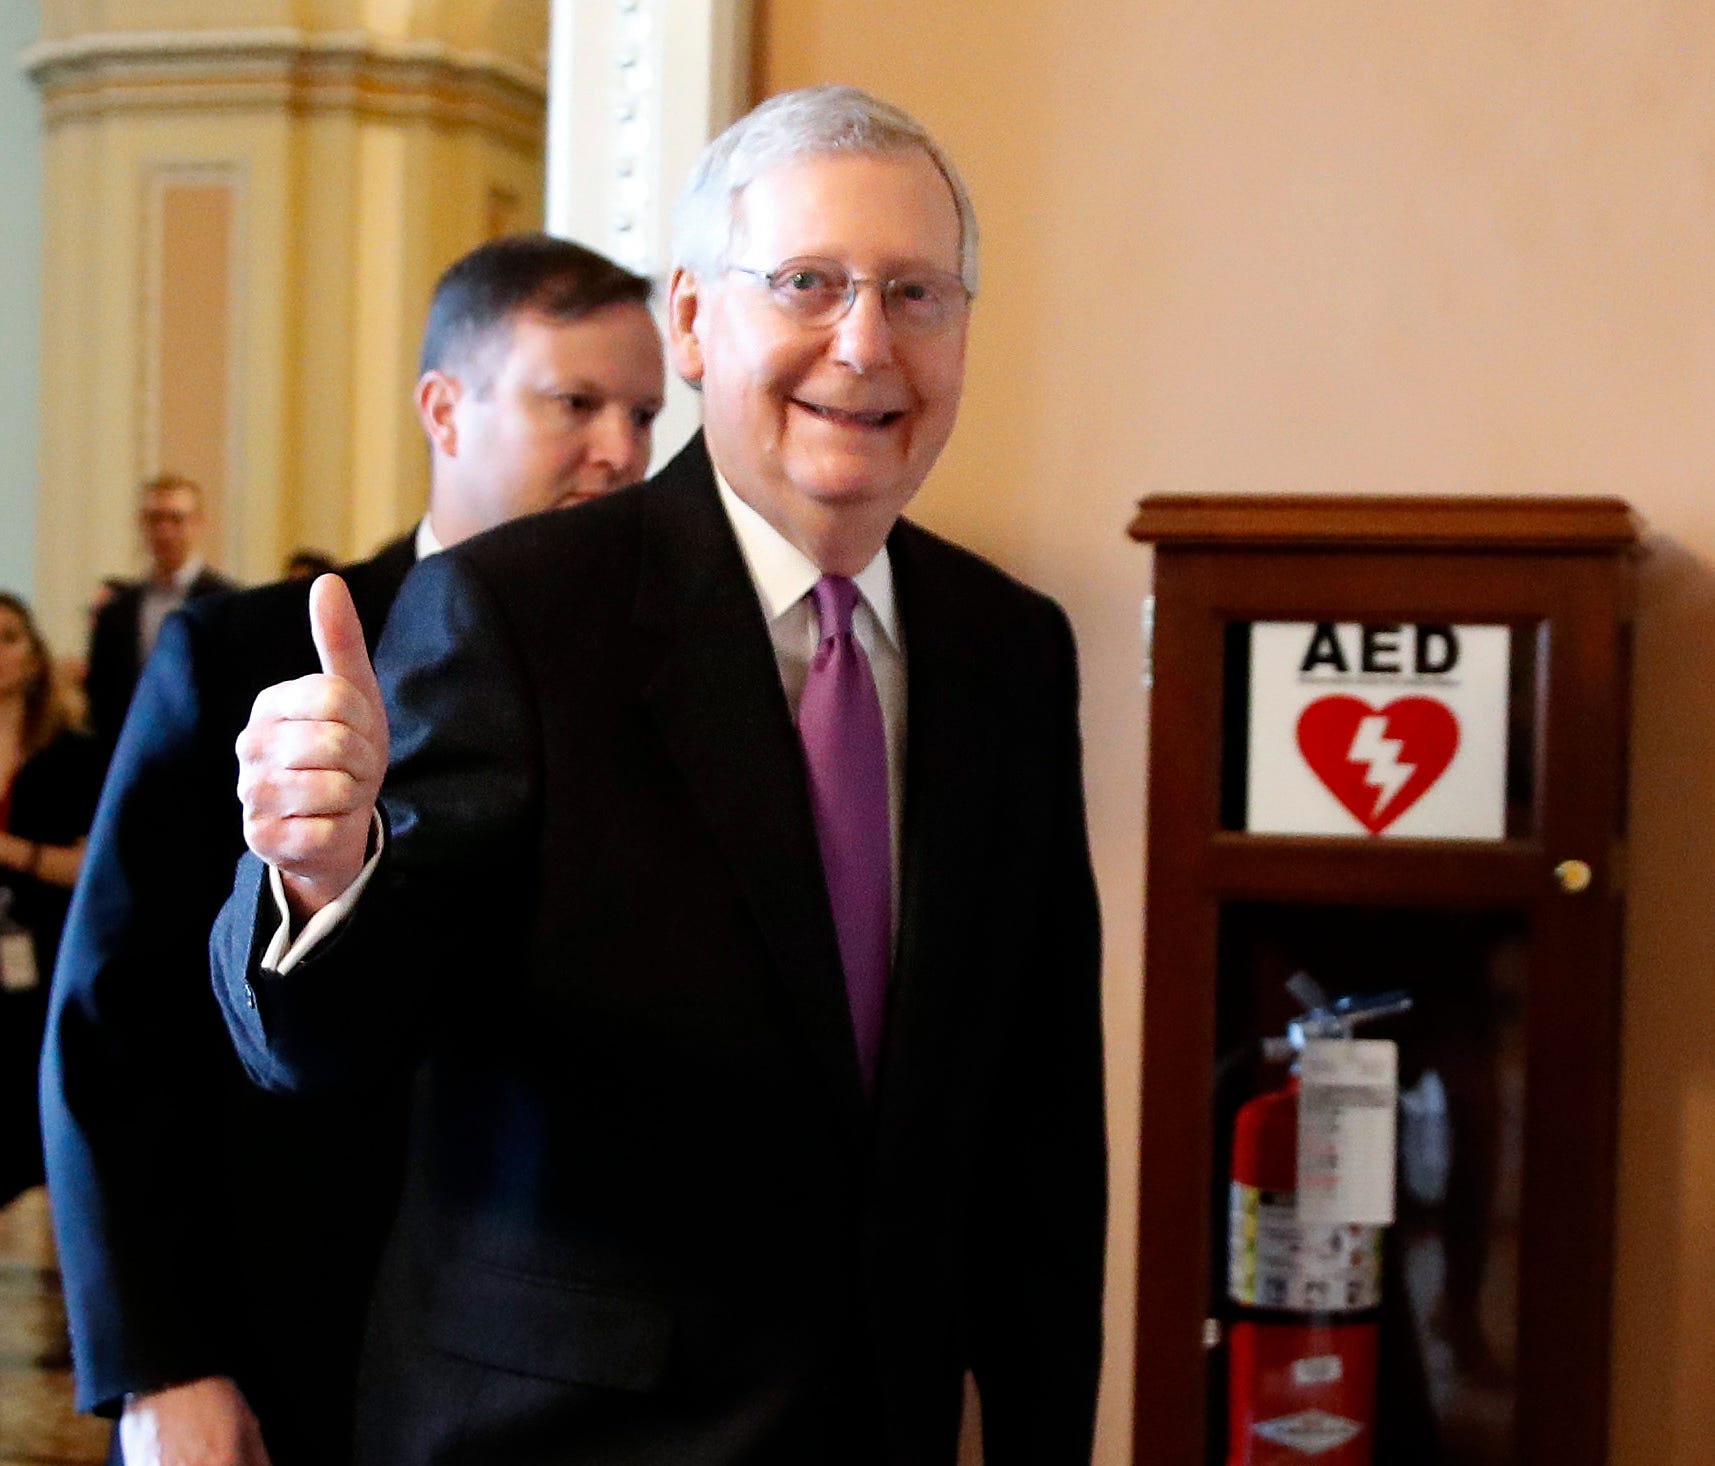 Senate Majority Leader Mitch McConnell of Ky., makes the thumbs up sign as he leaves the Senate floor after reaching an agreement to advance a bill ending the government shutdown, Jan. 22, 2018.